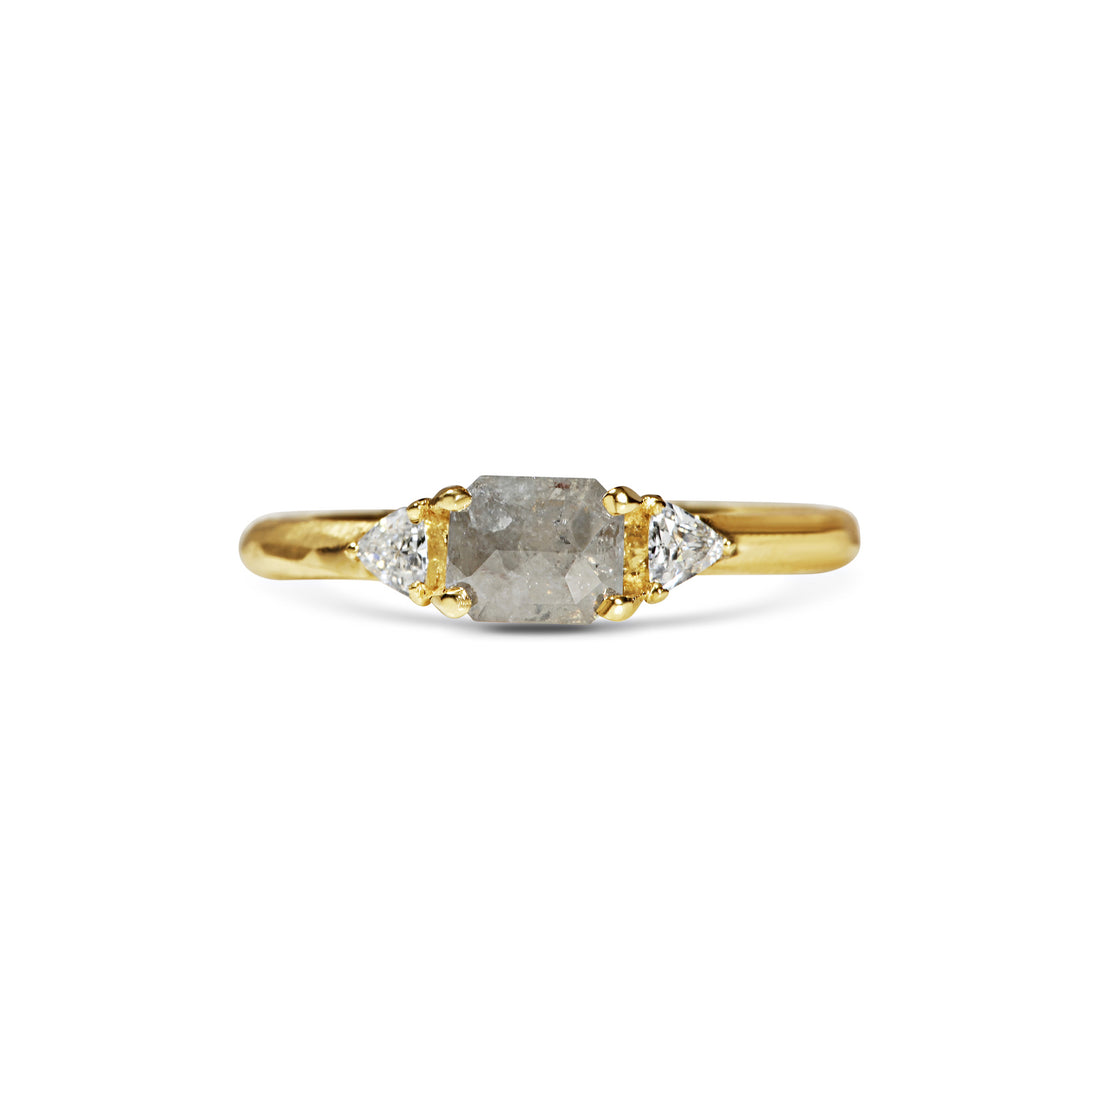  Grey Diamond Ring with Trillion Cut Side Stones by Michelle Oh | The Cut London